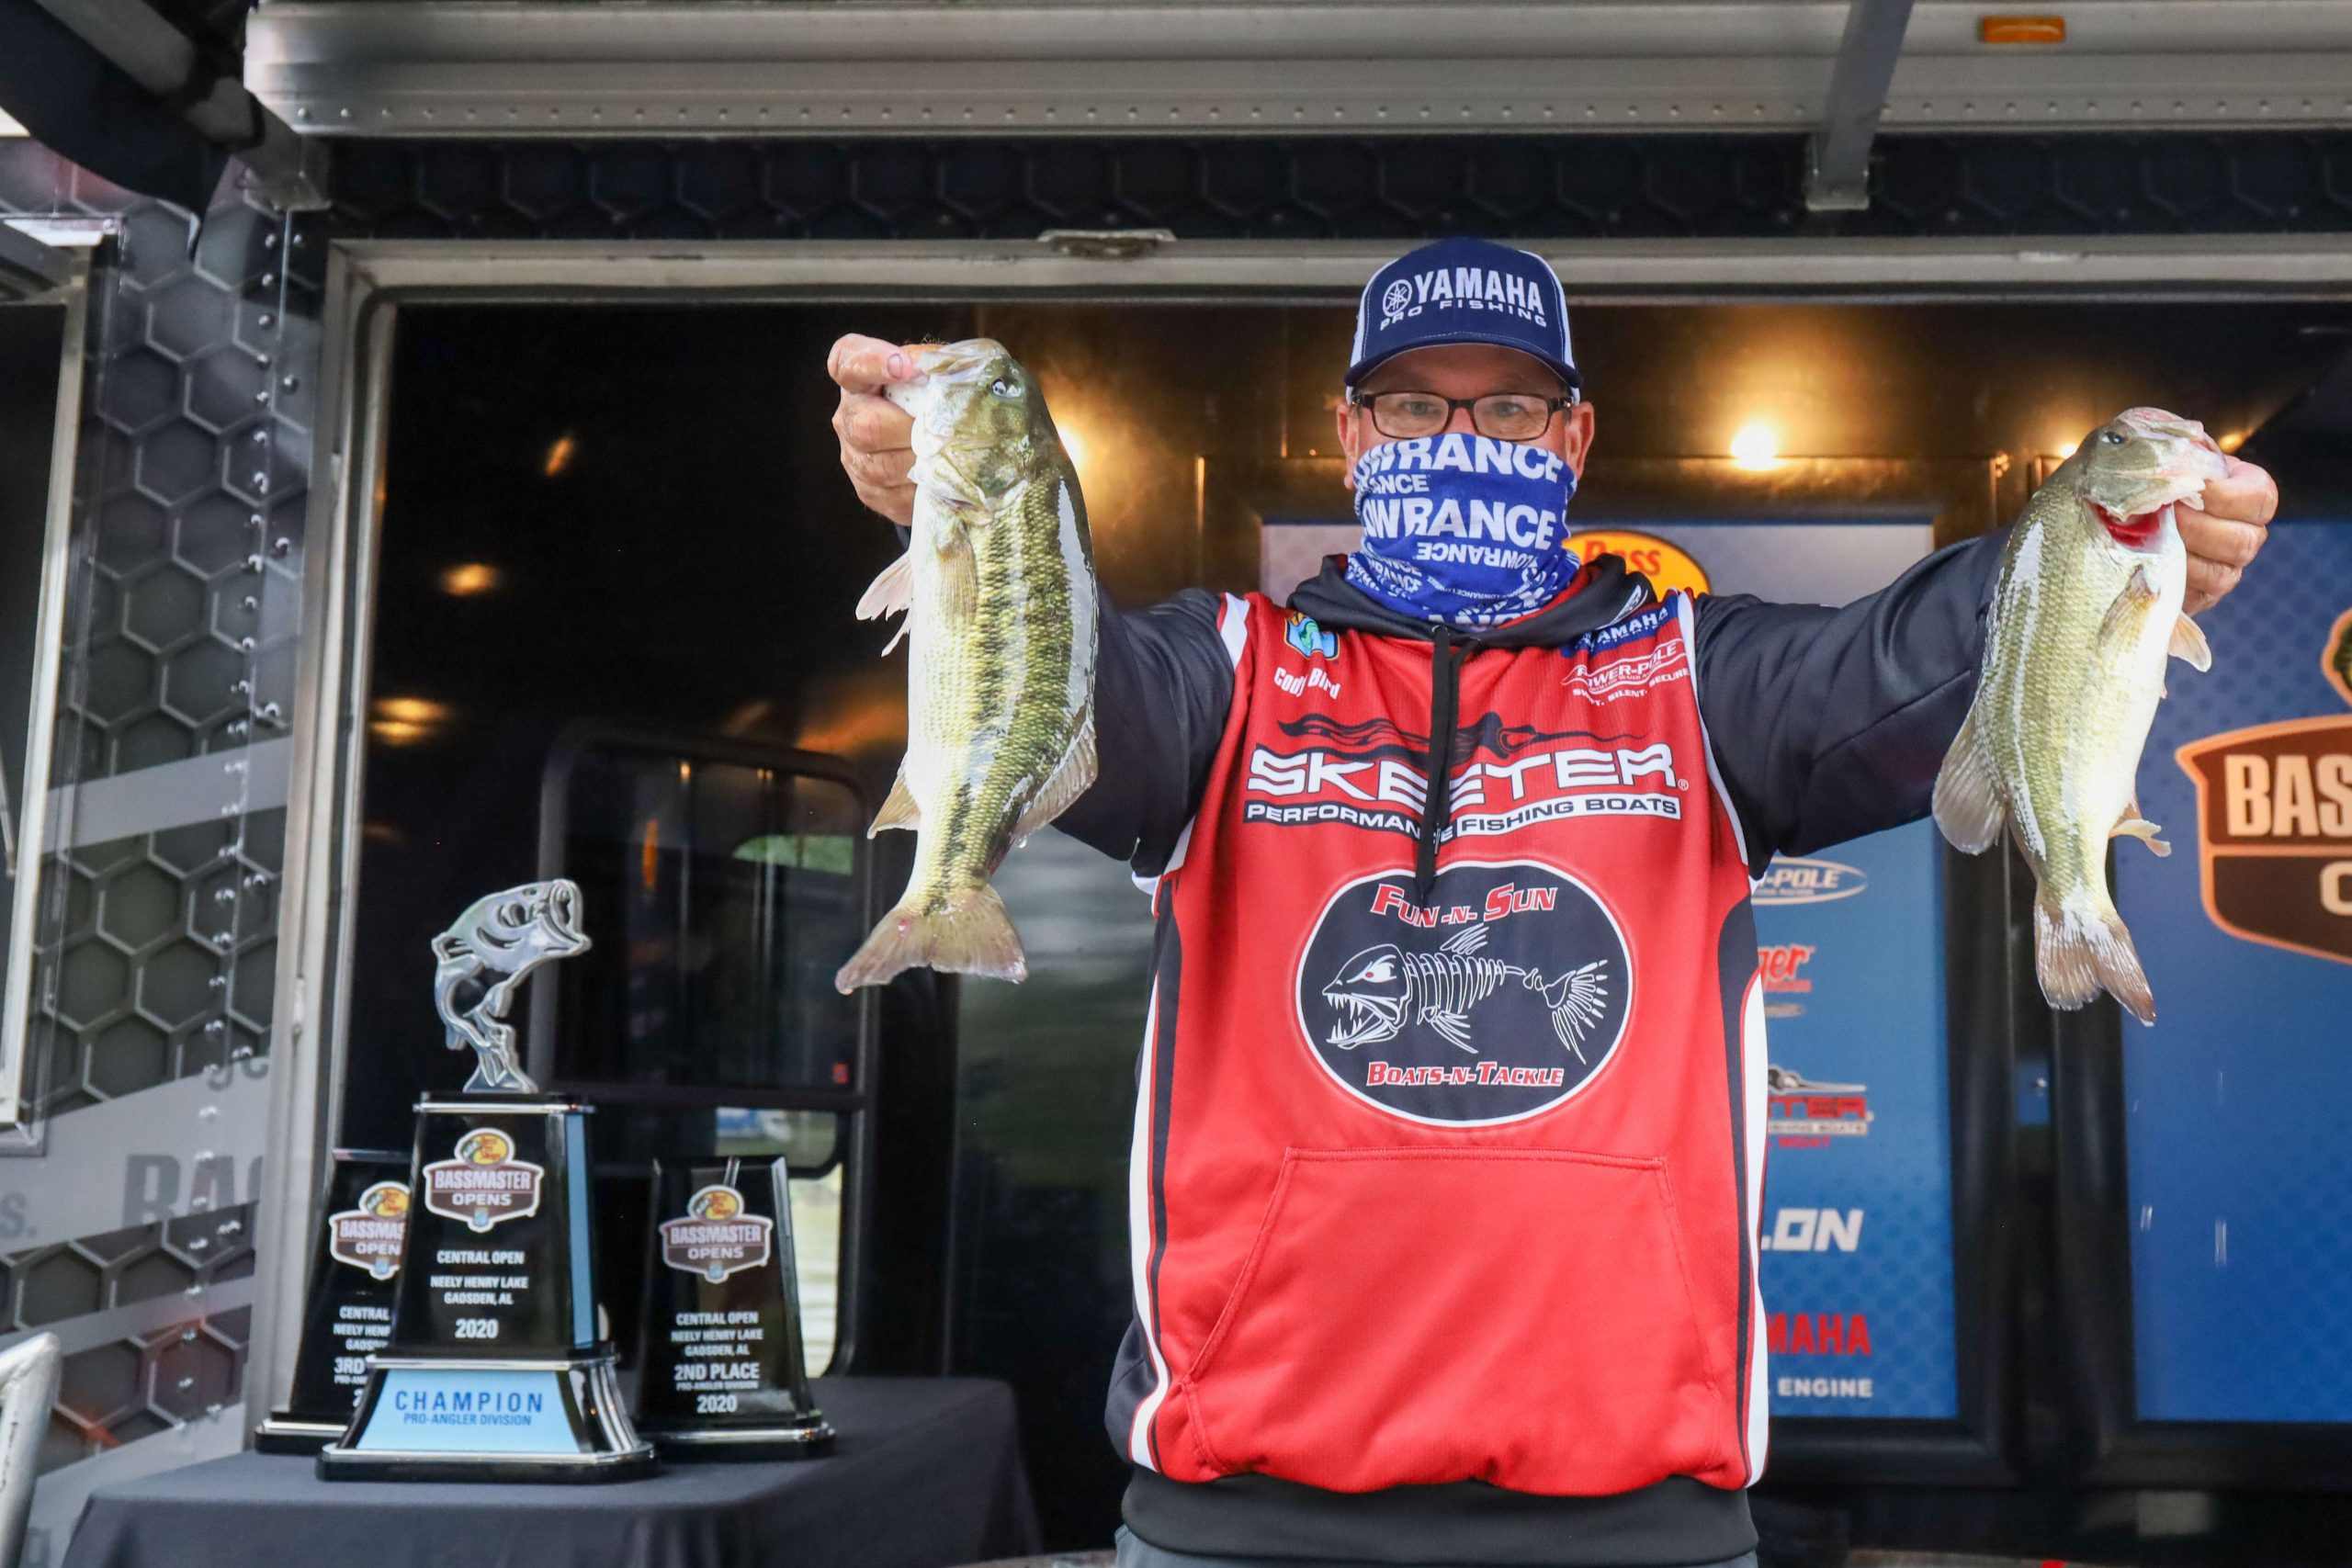 Cody Bird wins the 2020 Basspro.com Bassmaster Central Open at Neely Henry Lake with a three-day total of 34 pounds, 1 ounce. 